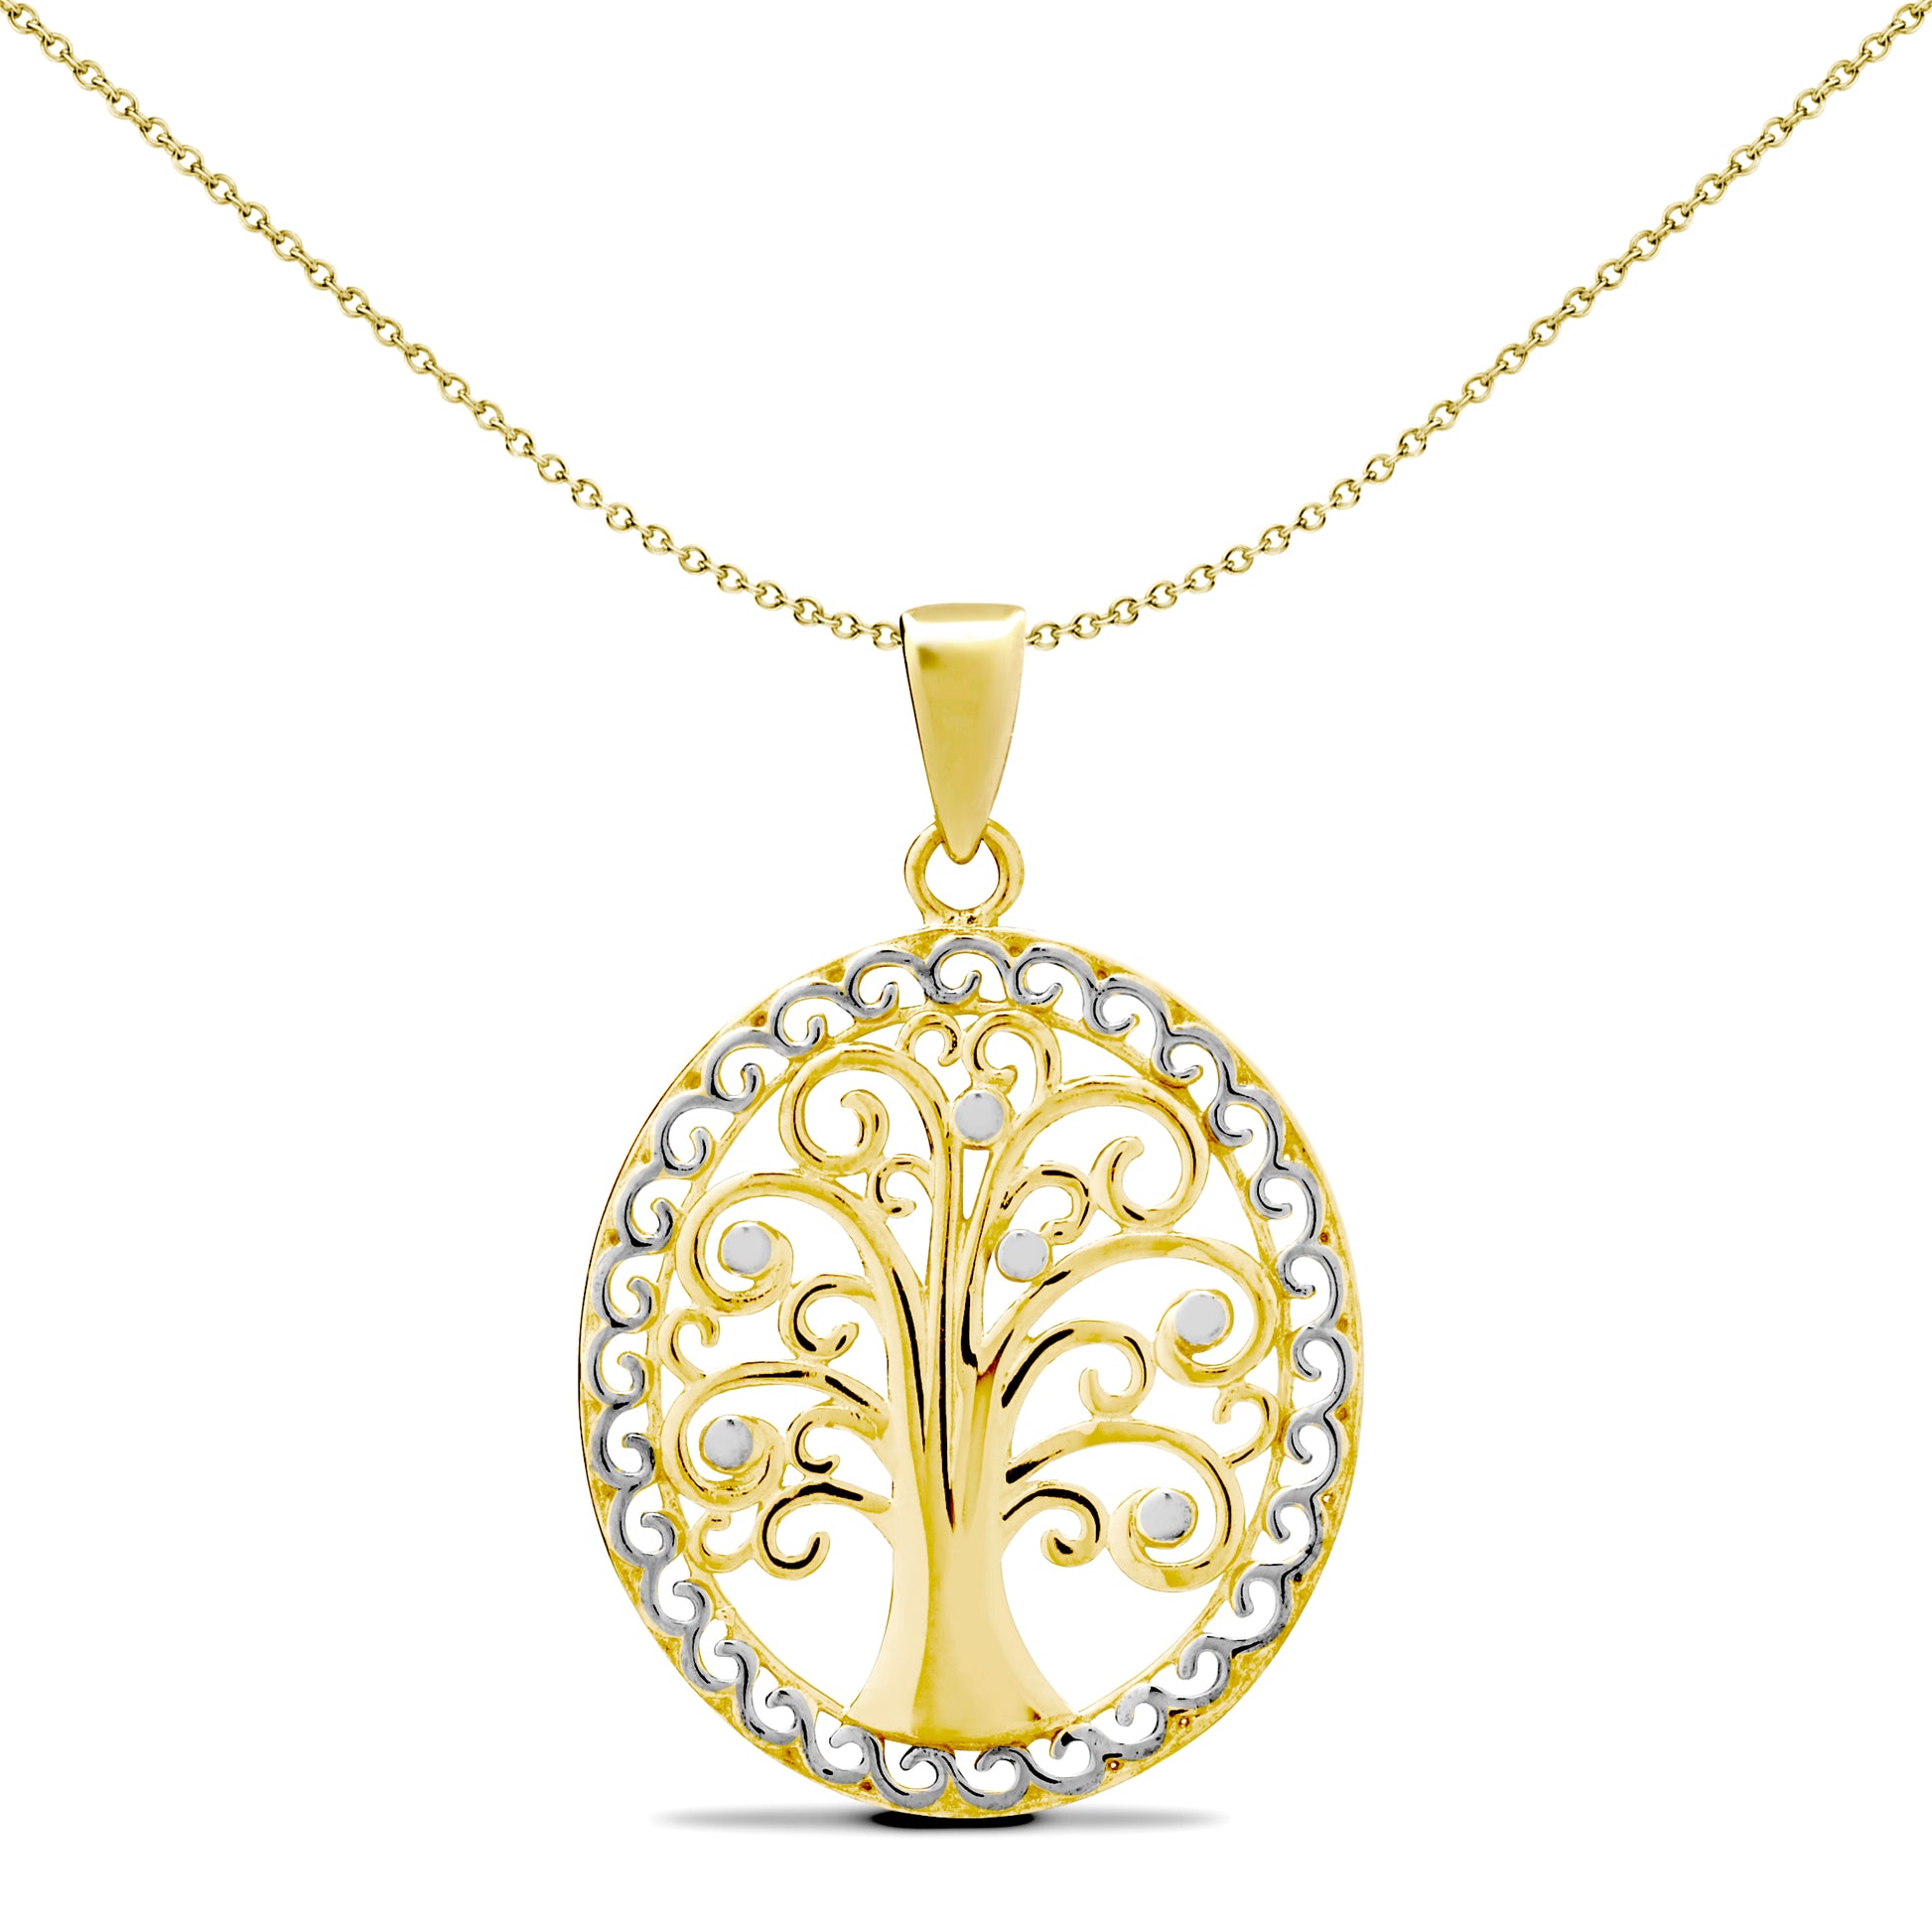 Ladies 9ct Yellow and White Gold  Tree of Life Charm Pendant - JPD585